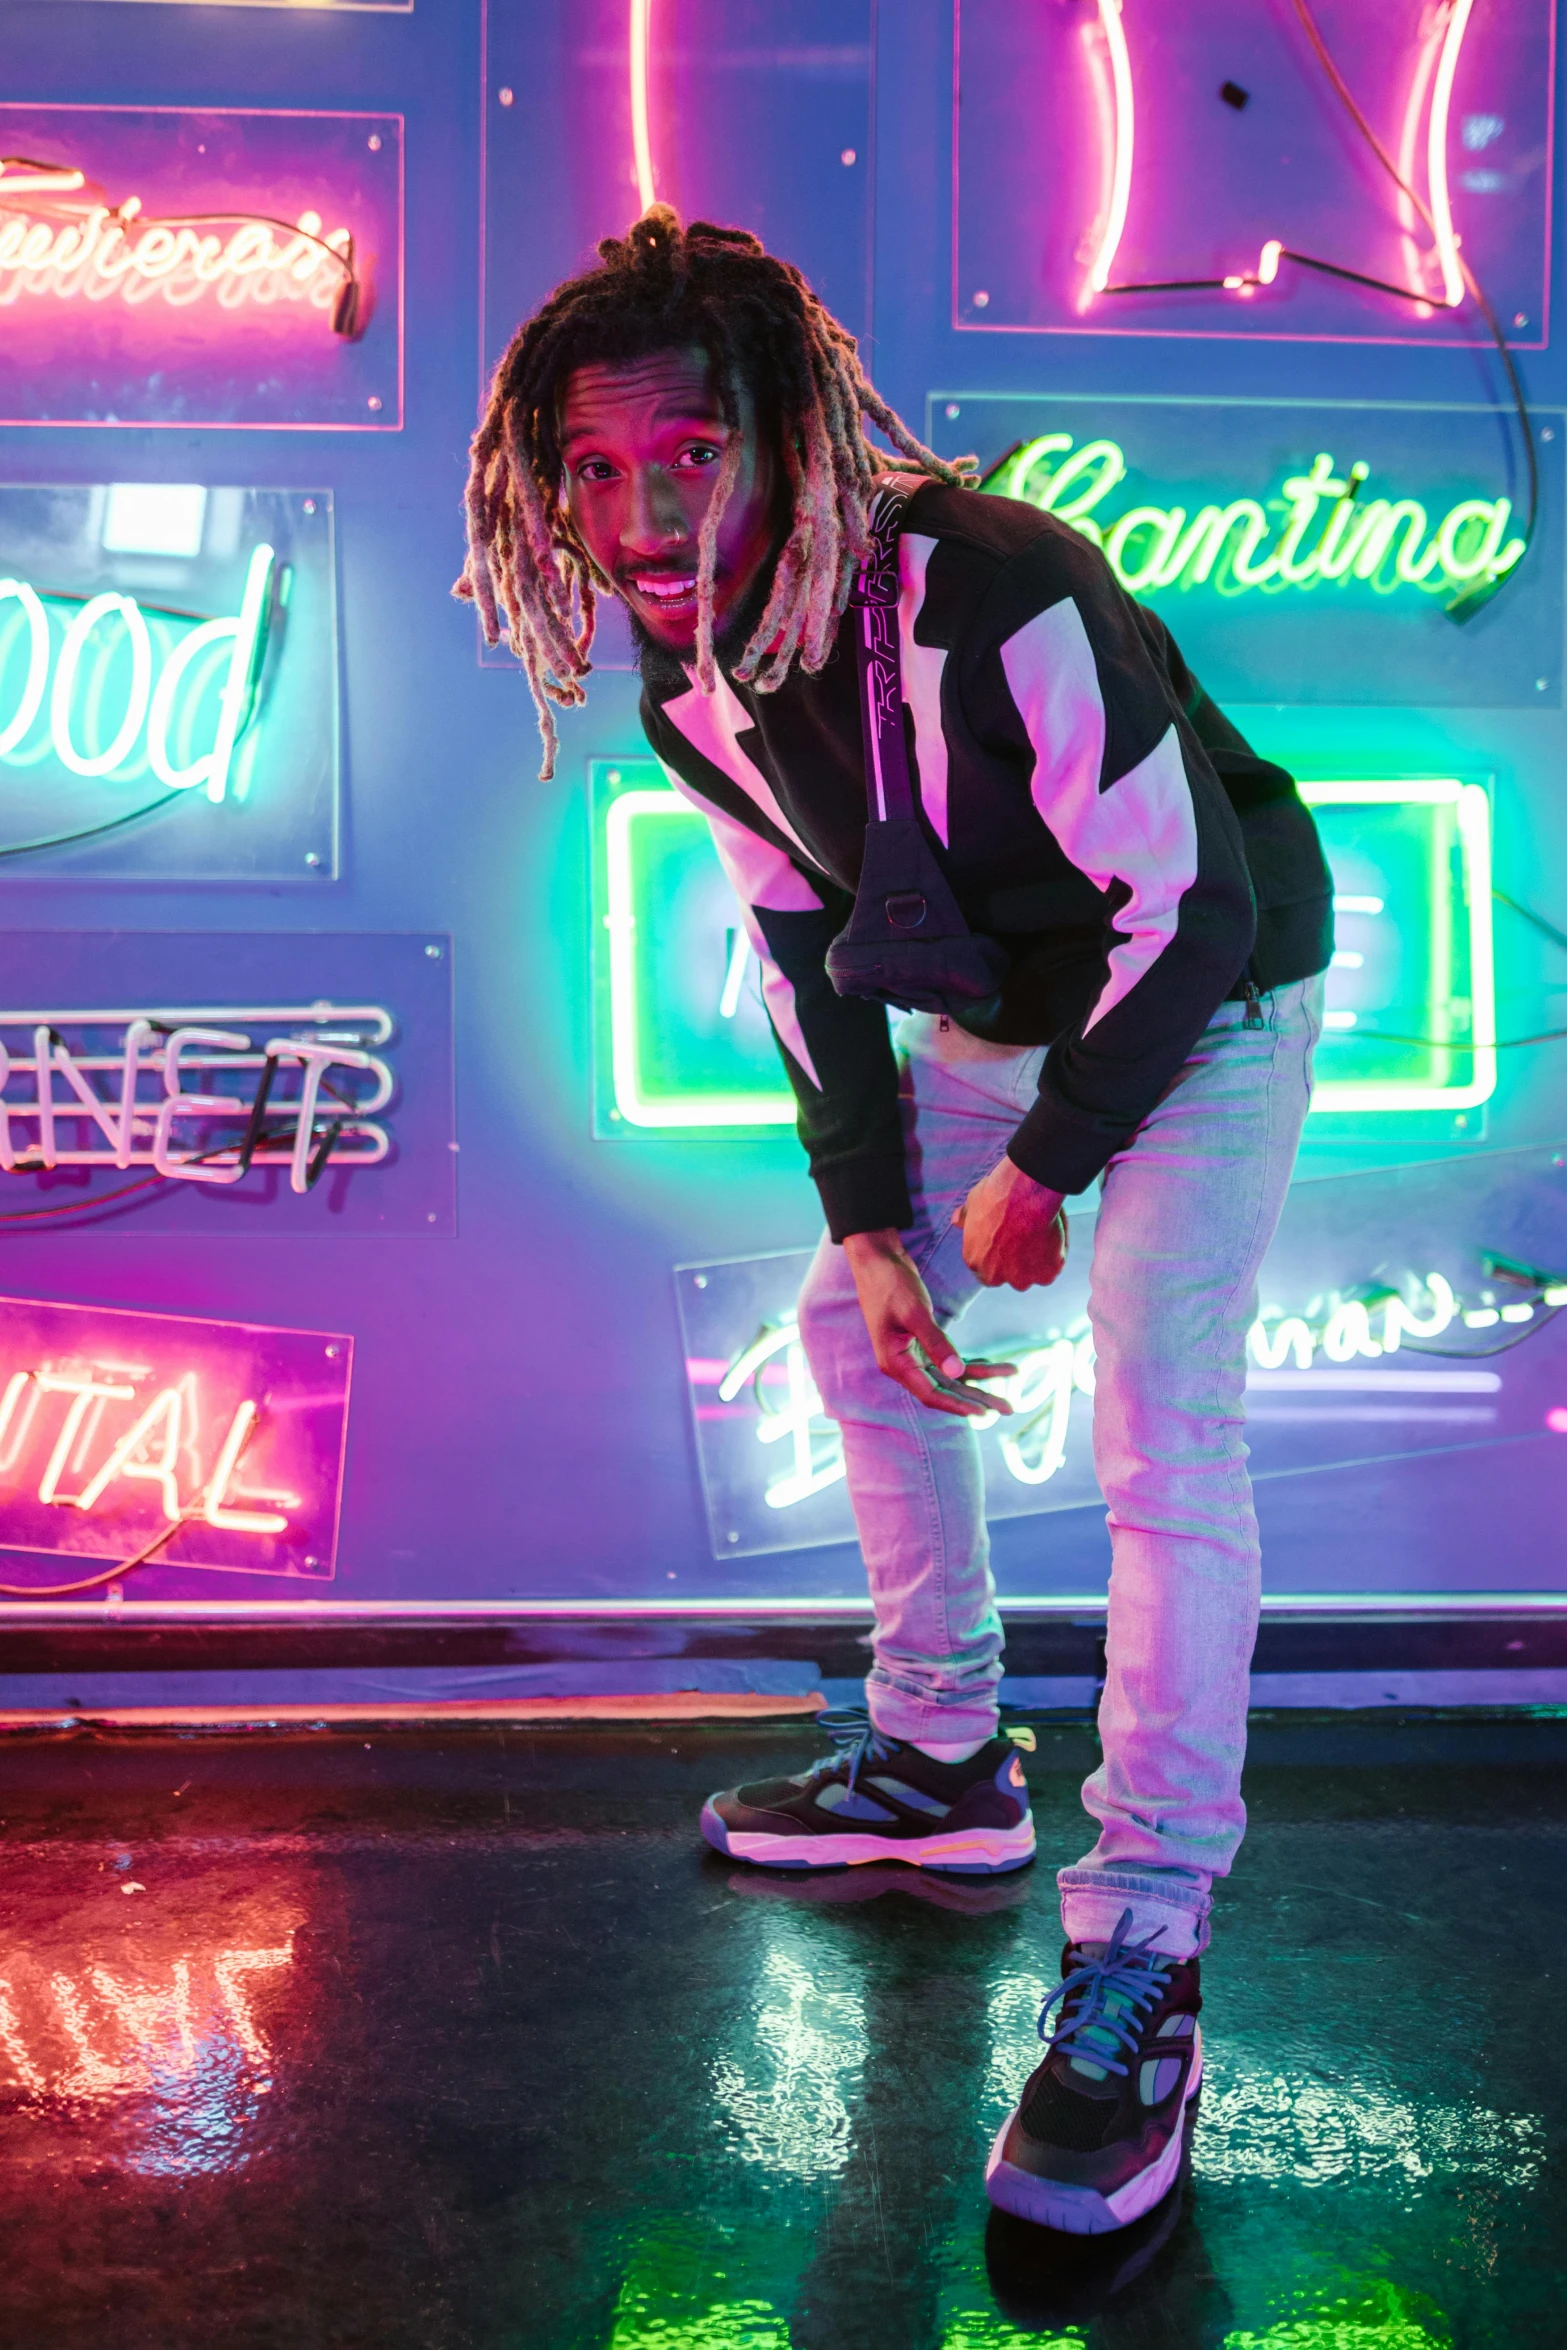 a man standing on a skateboard in front of neon signs, an album cover, trending on pexels, dreads, yzy gap, good lighted photo, posed